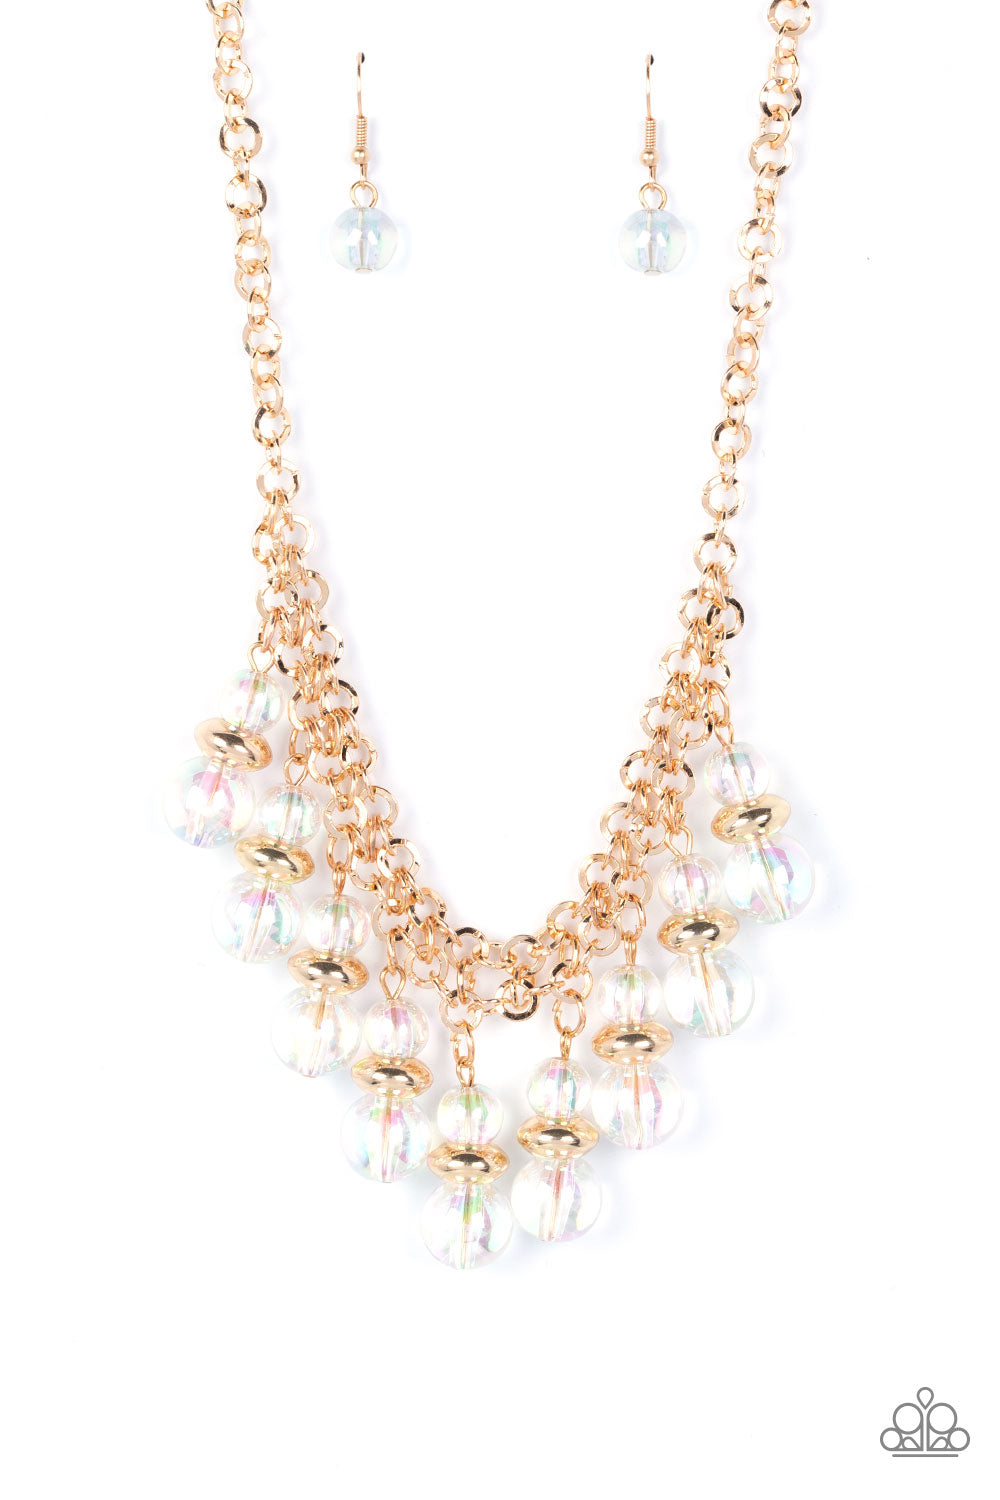 Paparazzi Accessories Deep Space Diva - Gold Featuring a stellar iridescence, pairs of glassy beads are separated by shiny gold discs, trickling below the collar in an effervescent fringe. Features an adjustable clasp closure. Due to its prismatic palette